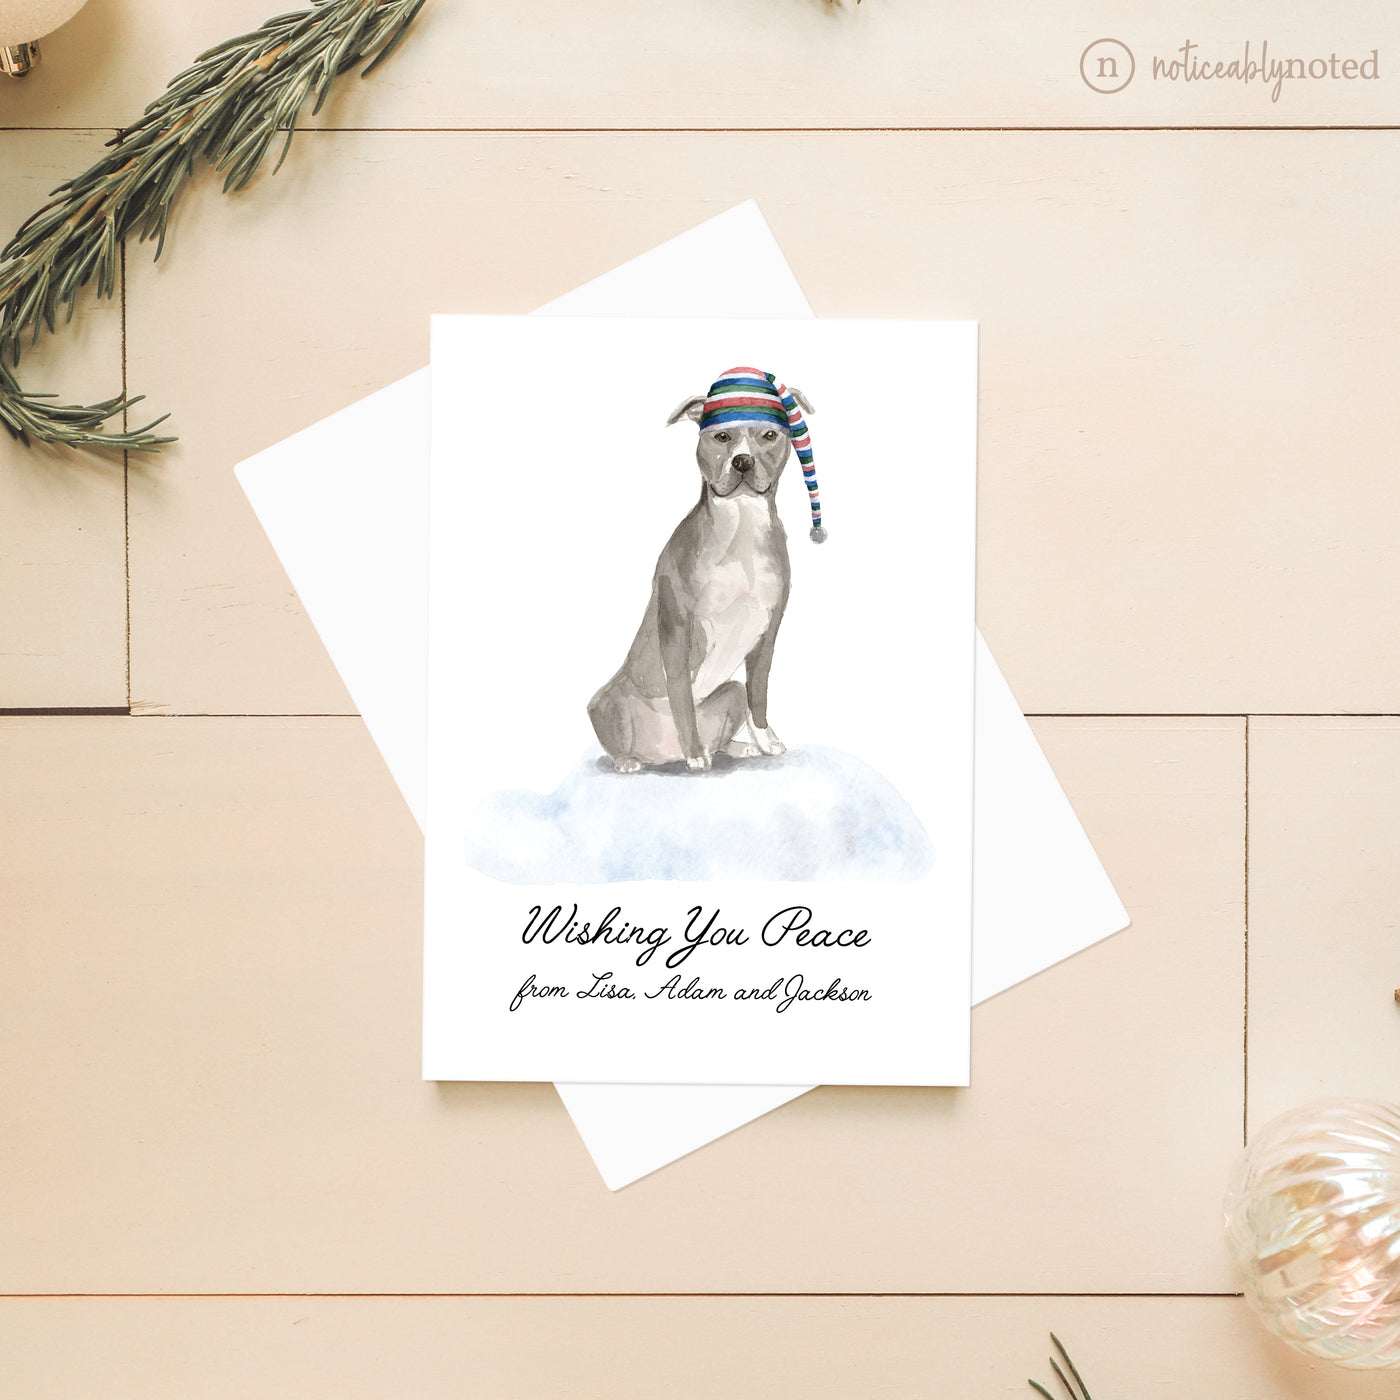 American Staffordshire Terrier Dog Christmas Card | Noticeably Noted